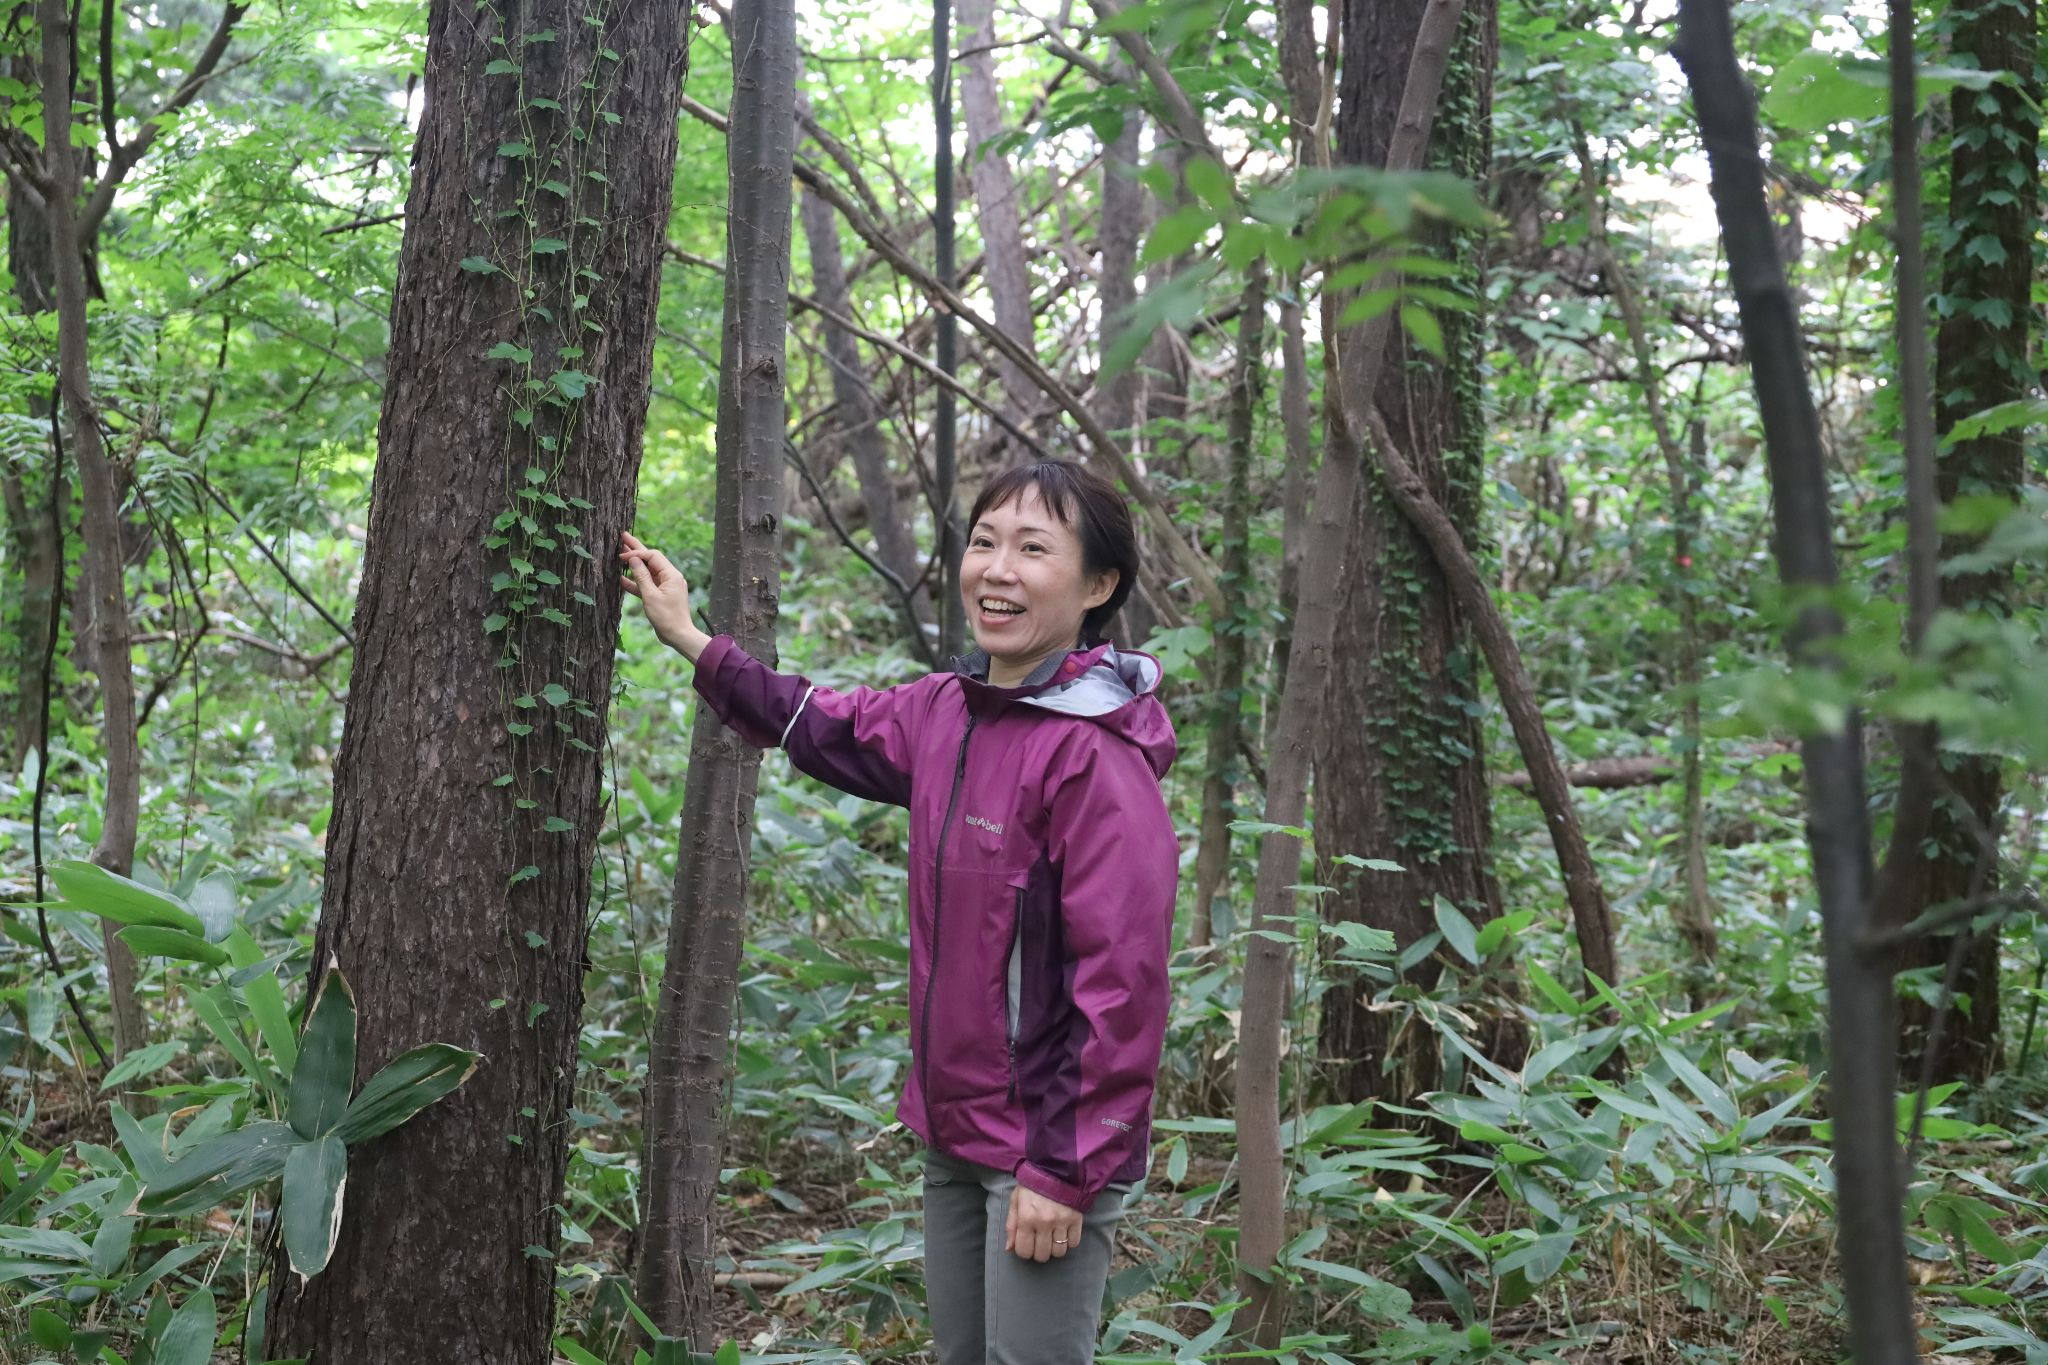 A photo of Associate Professor Junko Morimoto of the Research Faculty of Agriculture, Hokkaido University at the Sapporo Experimental Forest. Photo by Aprillia Agatha Gunawan.